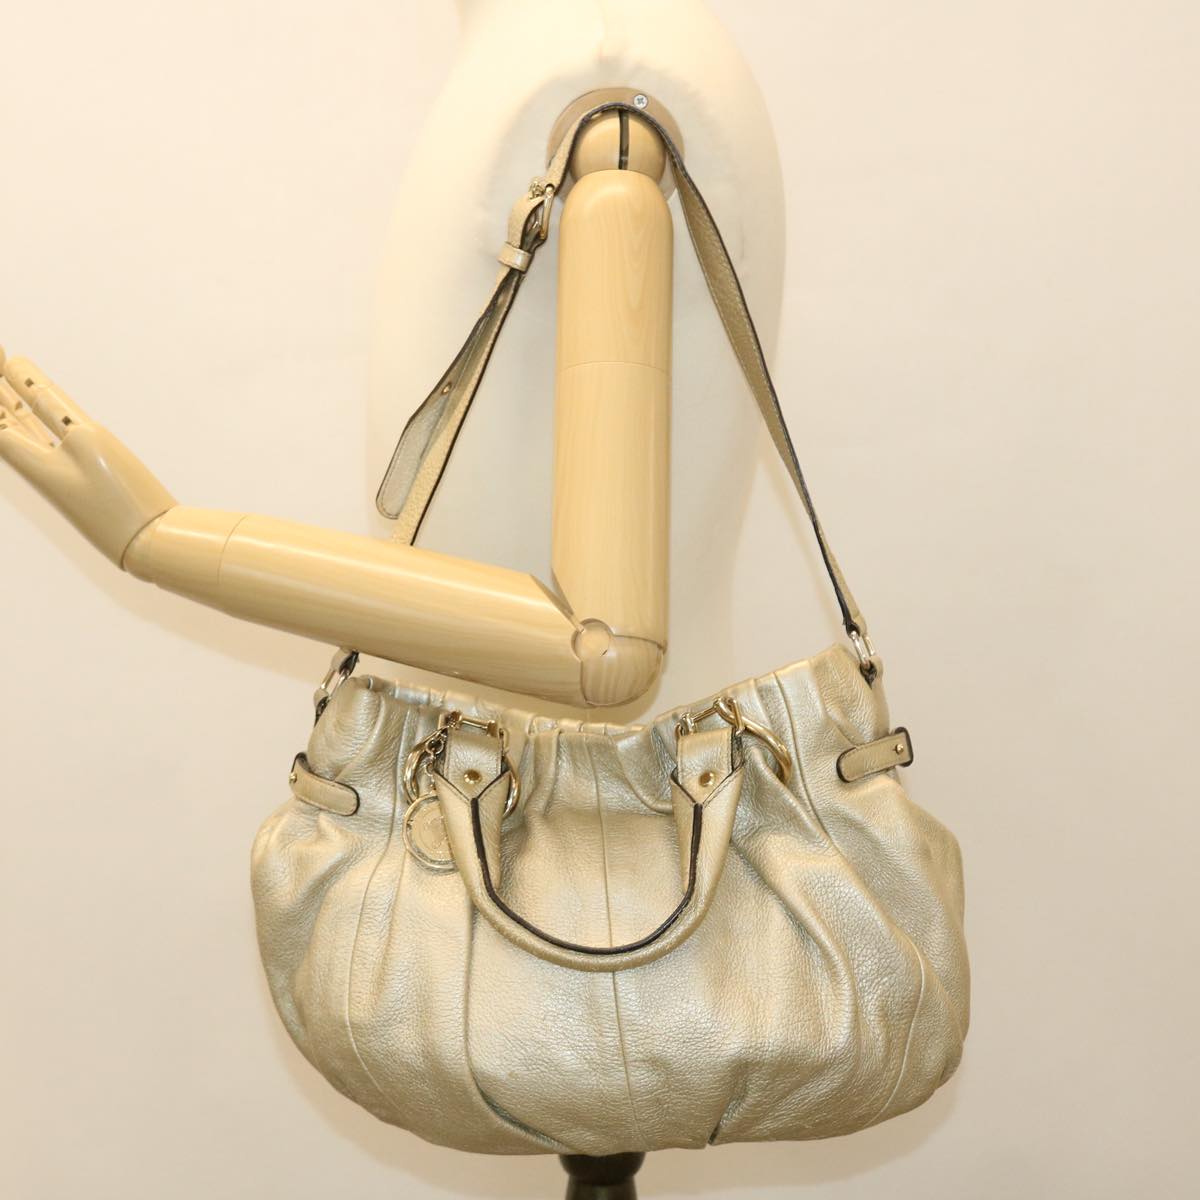 CELINE Hand Bag Leather 2way Silver WC-AT0069 Auth 39622